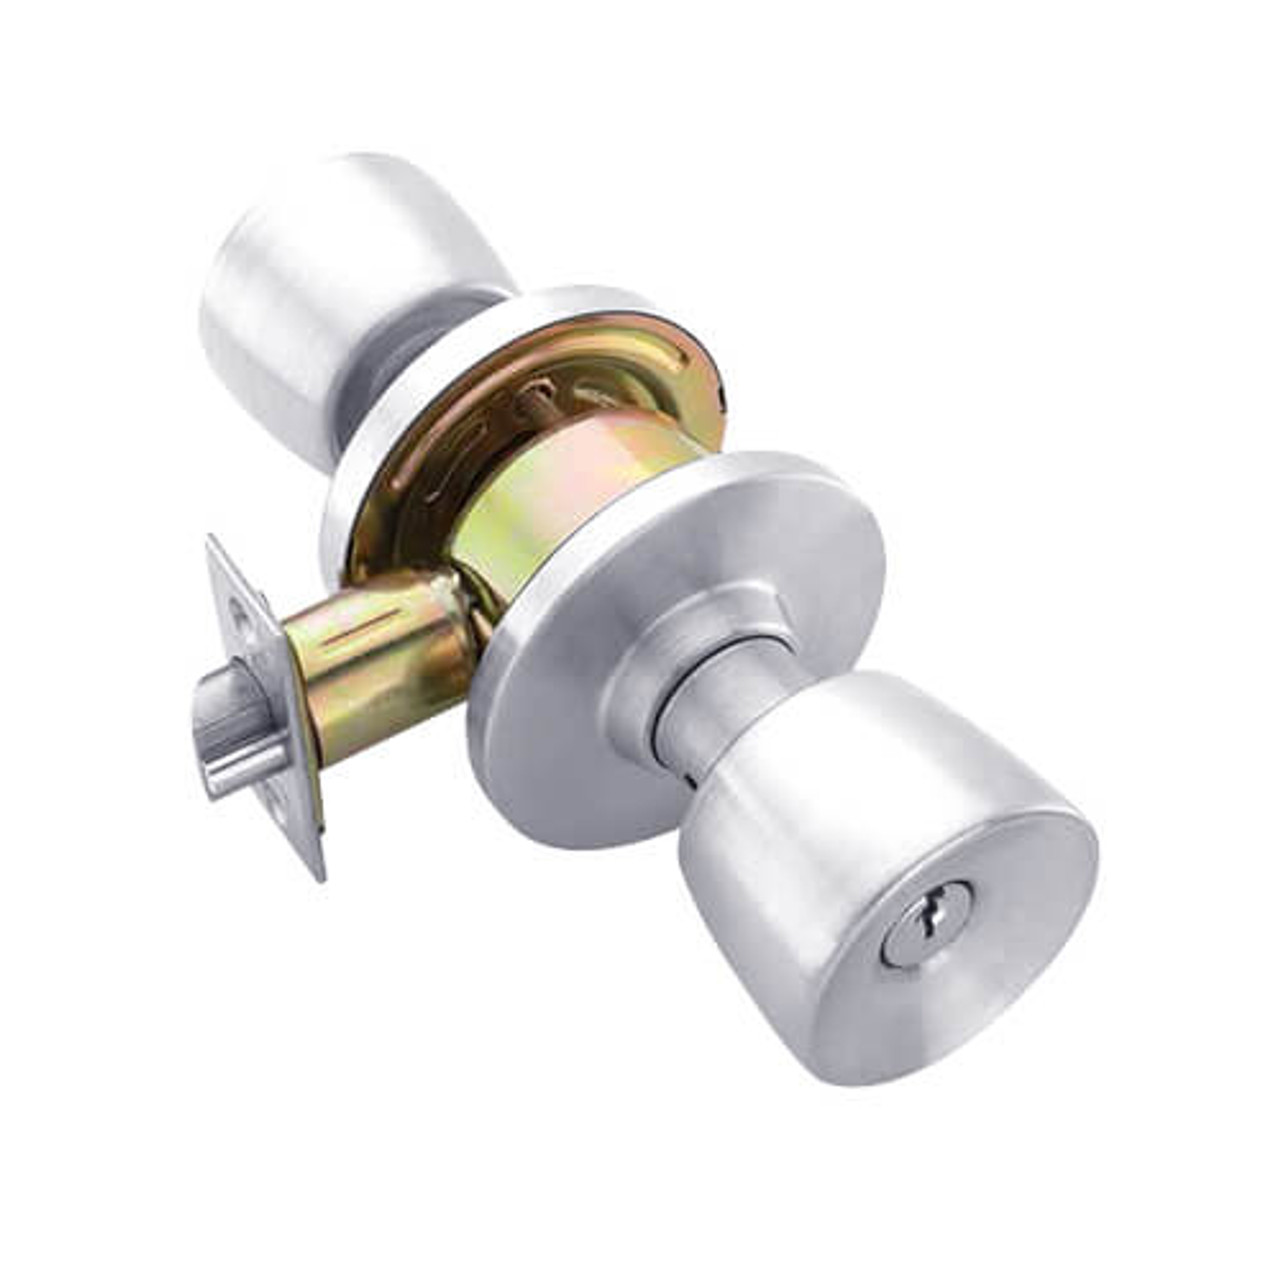 W711PD-E-625 Falcon W Series Cylindrical Apartment Entry Lock with Elite Knob Style in Bright Chrome Finish